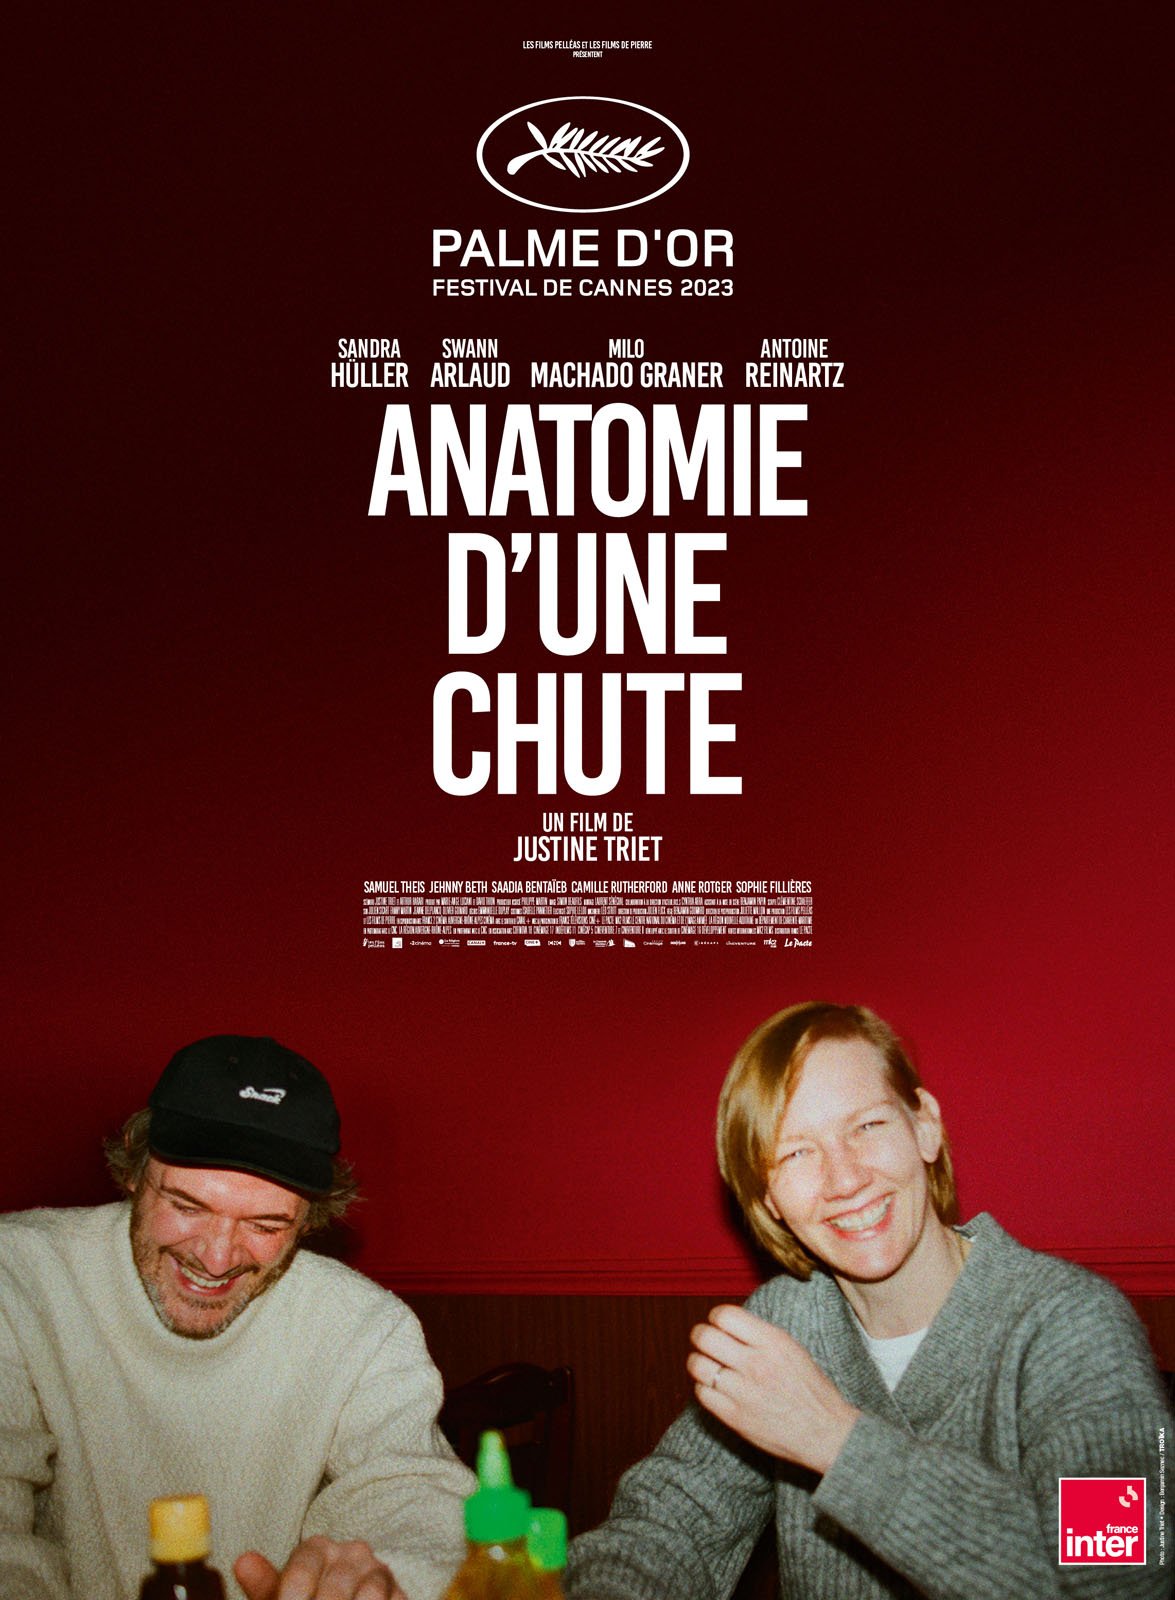 Anatomie d’une chute - film 2023 streaming VF gratuit complet